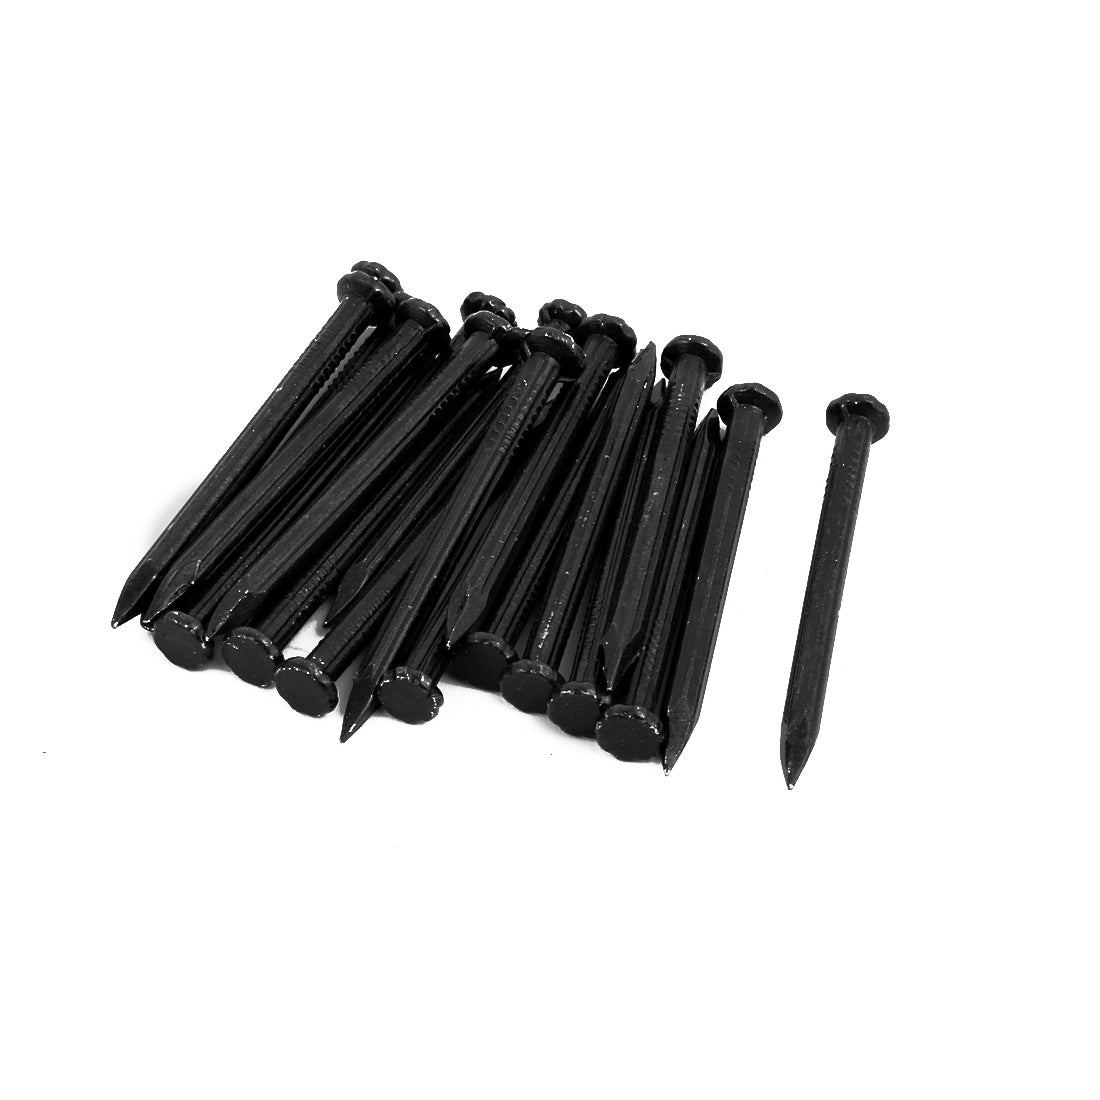 uxcell Uxcell 3mm x 40mm Fiber Concrete Cement Wall Point Tip Nails Black 50pcs